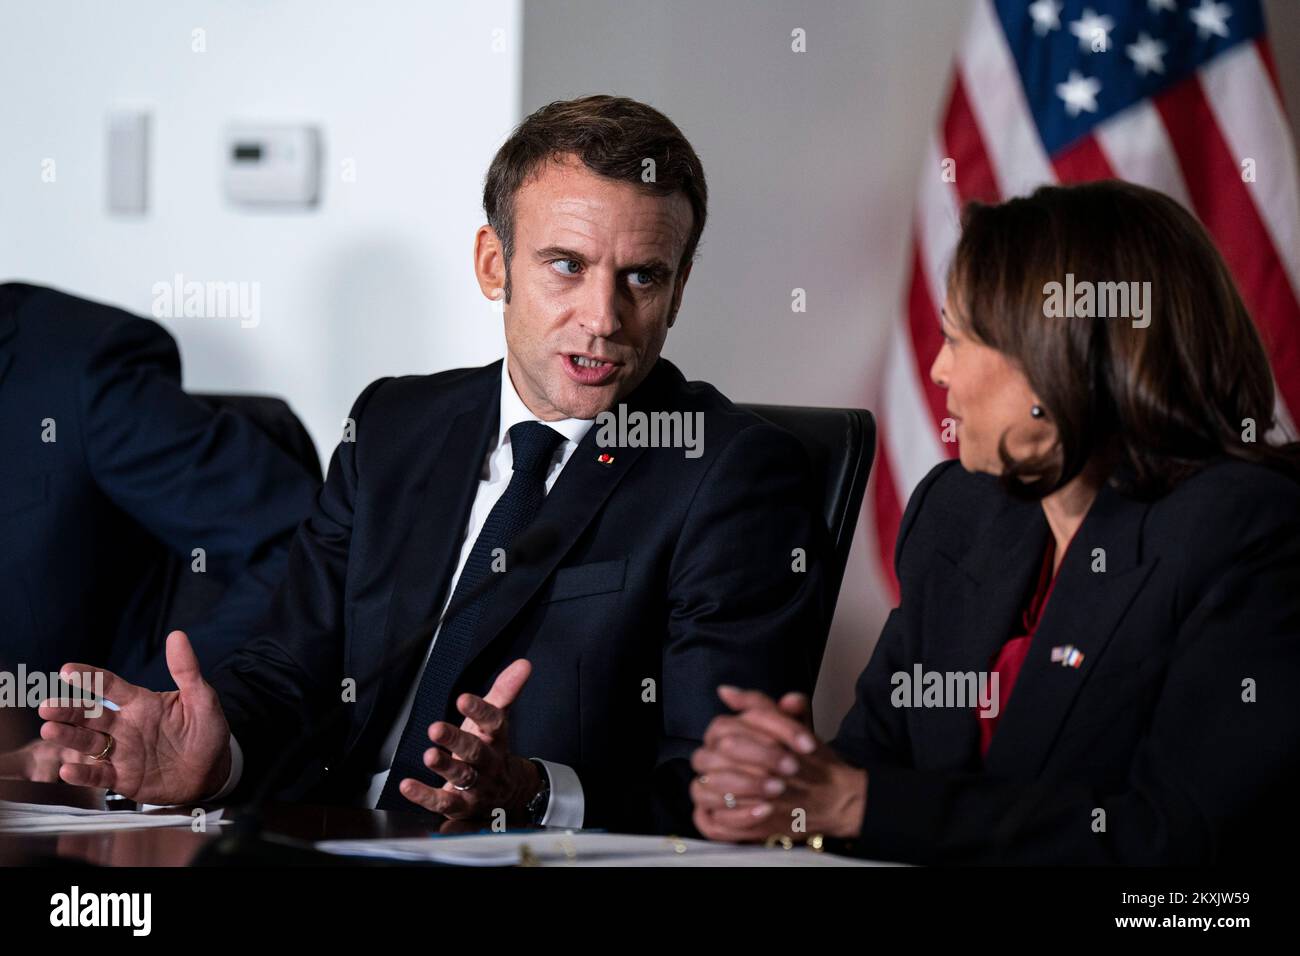 Washington, DC, USA. 30th Nov, 2022. Emmanuel Macron, France's president, speaks with United States Vice President Kamala Harris during a briefing at the NASA headquarters in Washington, DC, US, on Wednesday, Nov. 30, 2022. President Joe Biden will welcome Macron for the first White House state dinner in more than three years on Thursday, setting aside recent tensions with Paris over defense and trade issues to celebrate the oldest US alliance. Credit: Al Drago/Pool via CNP/dpa/Alamy Live News Stock Photo